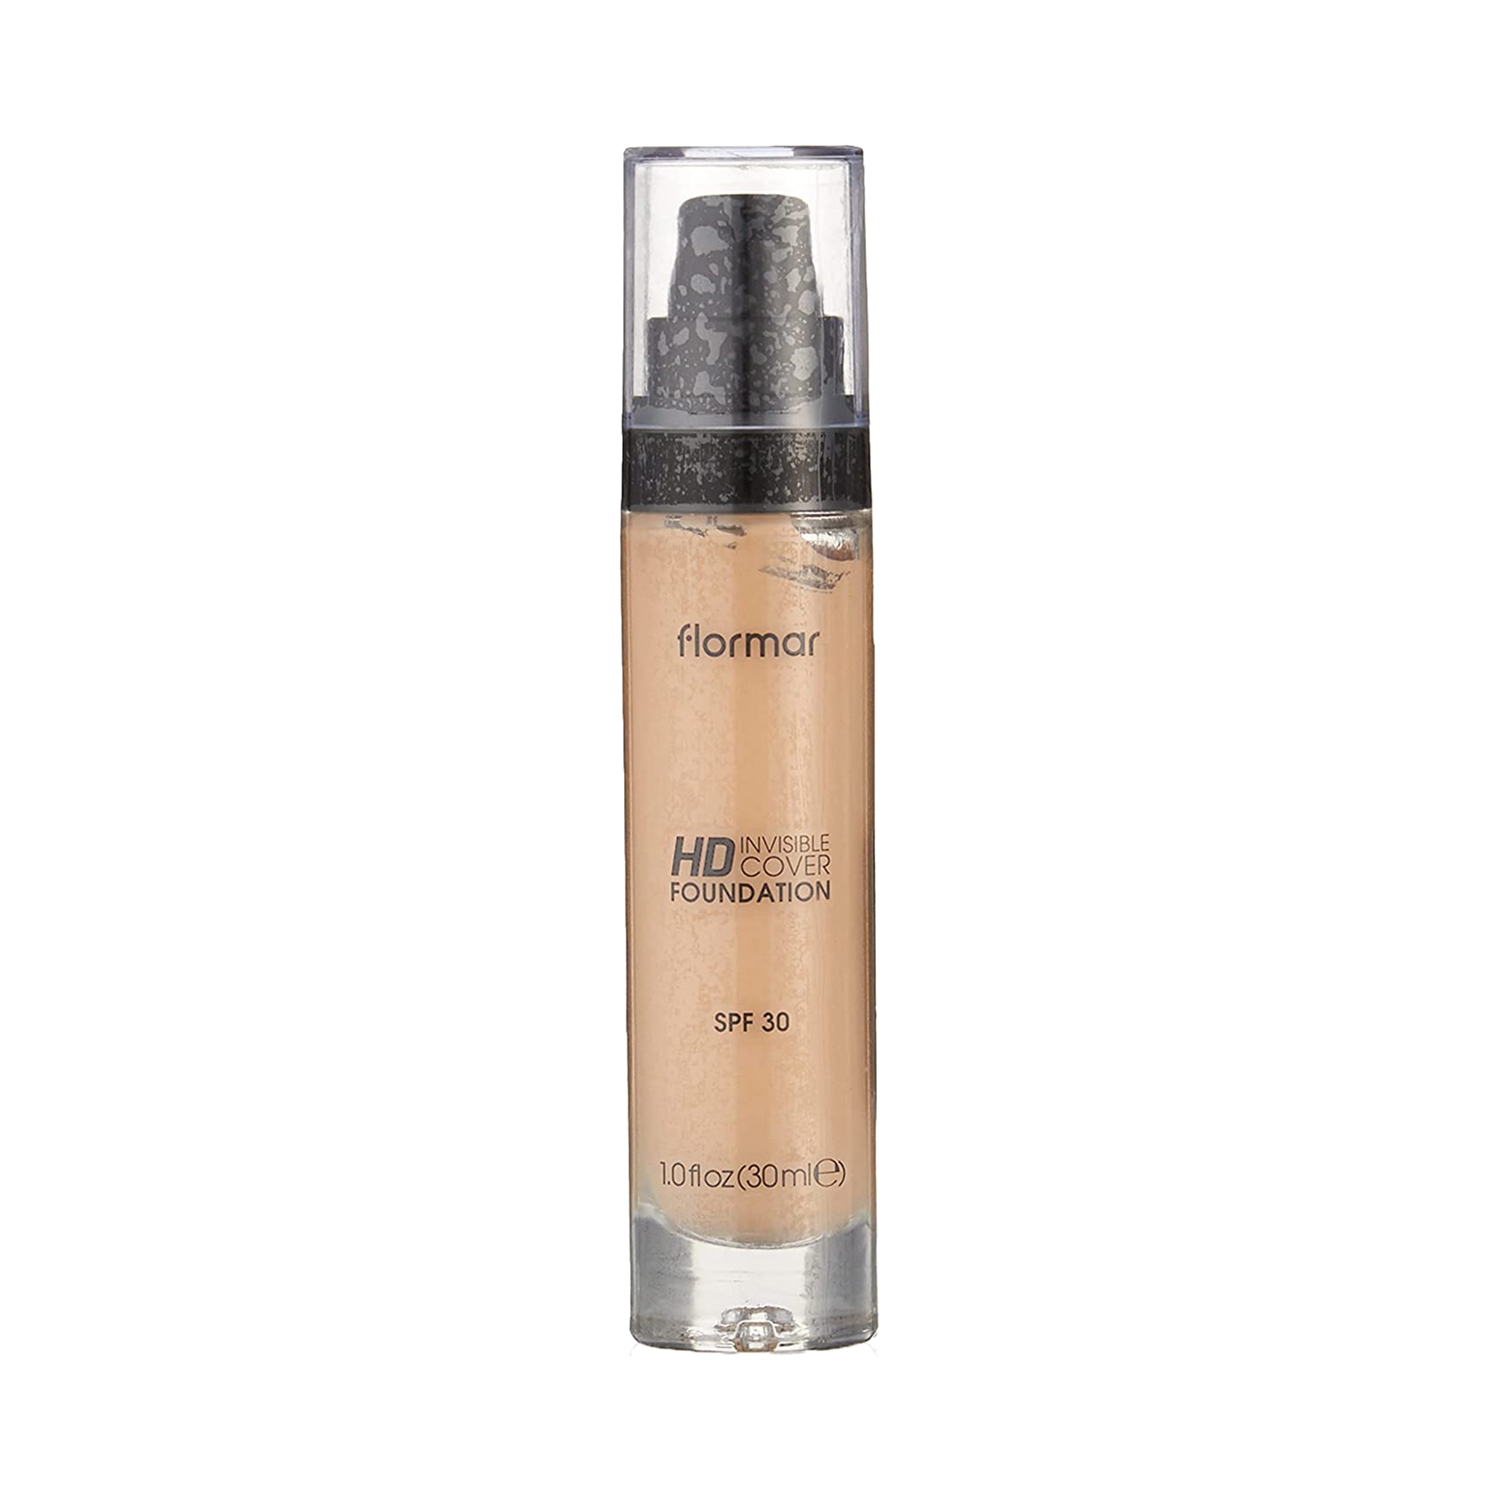 FLORMAR PERFECT COVERAGE FOUNDATION – Nofal Trading and Marketing Co.